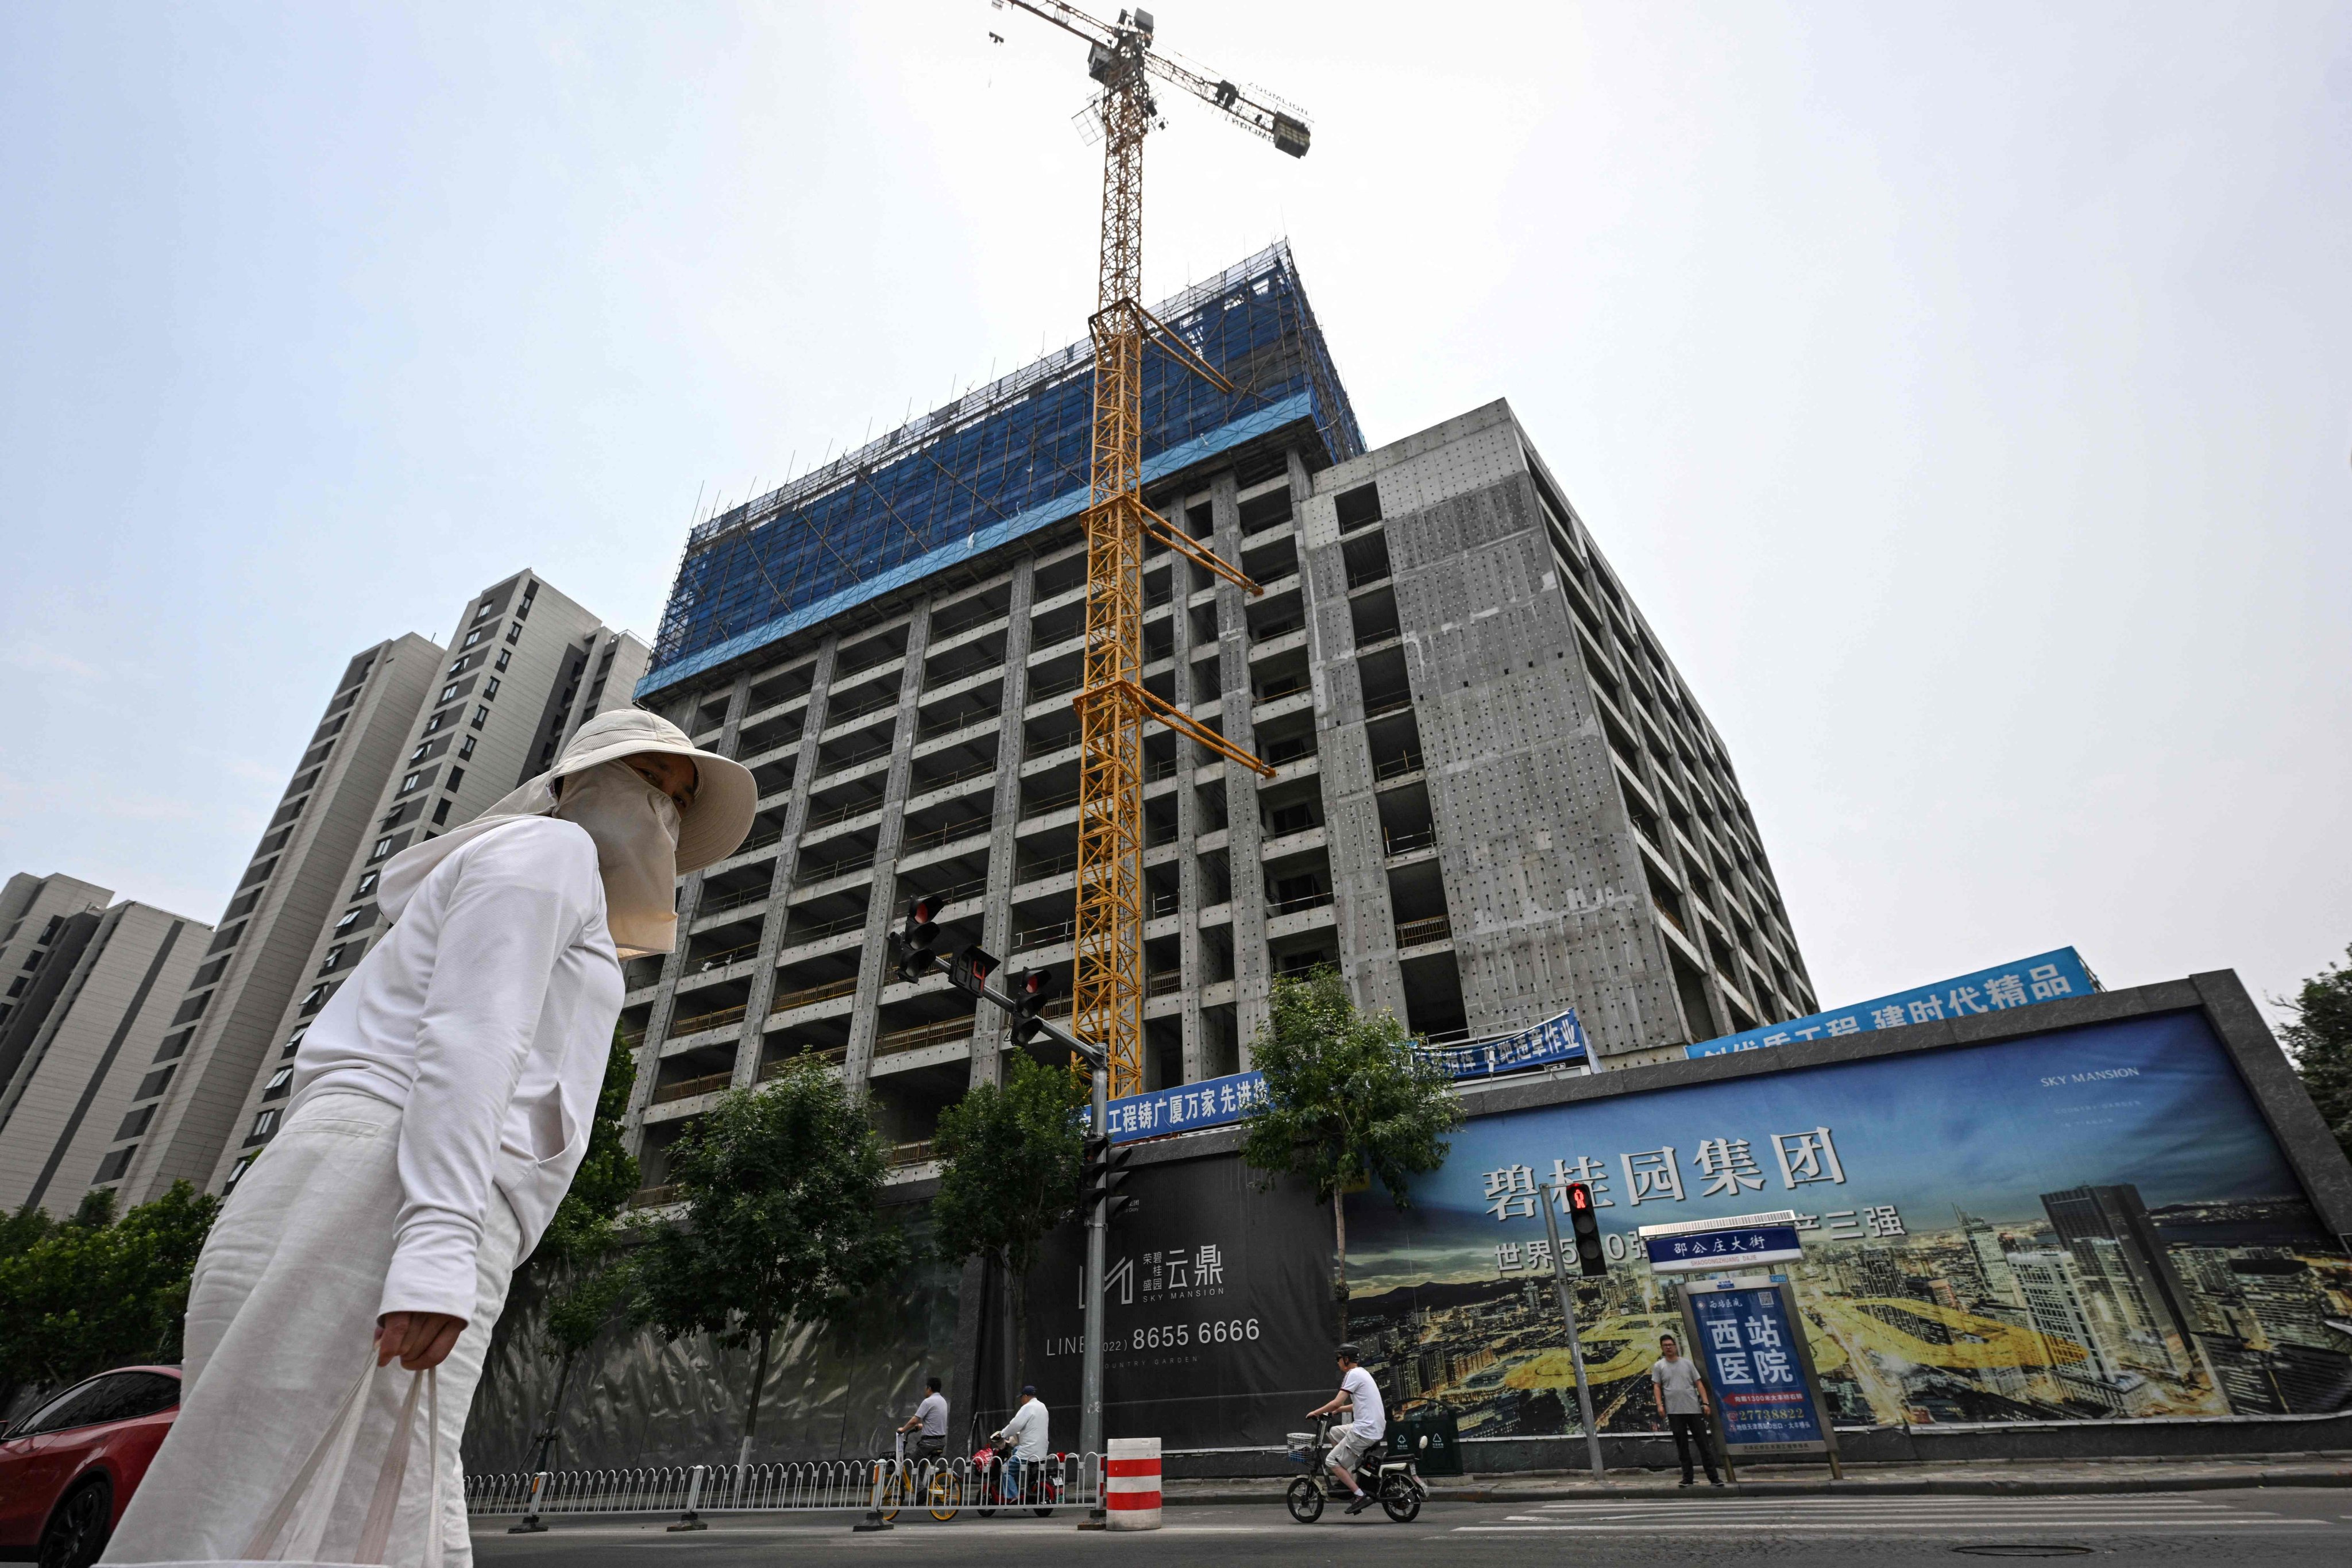 China’s property market is still struggling as various policies are tested to try to stabilise the sector which is vital to the economy. Photo: AFP